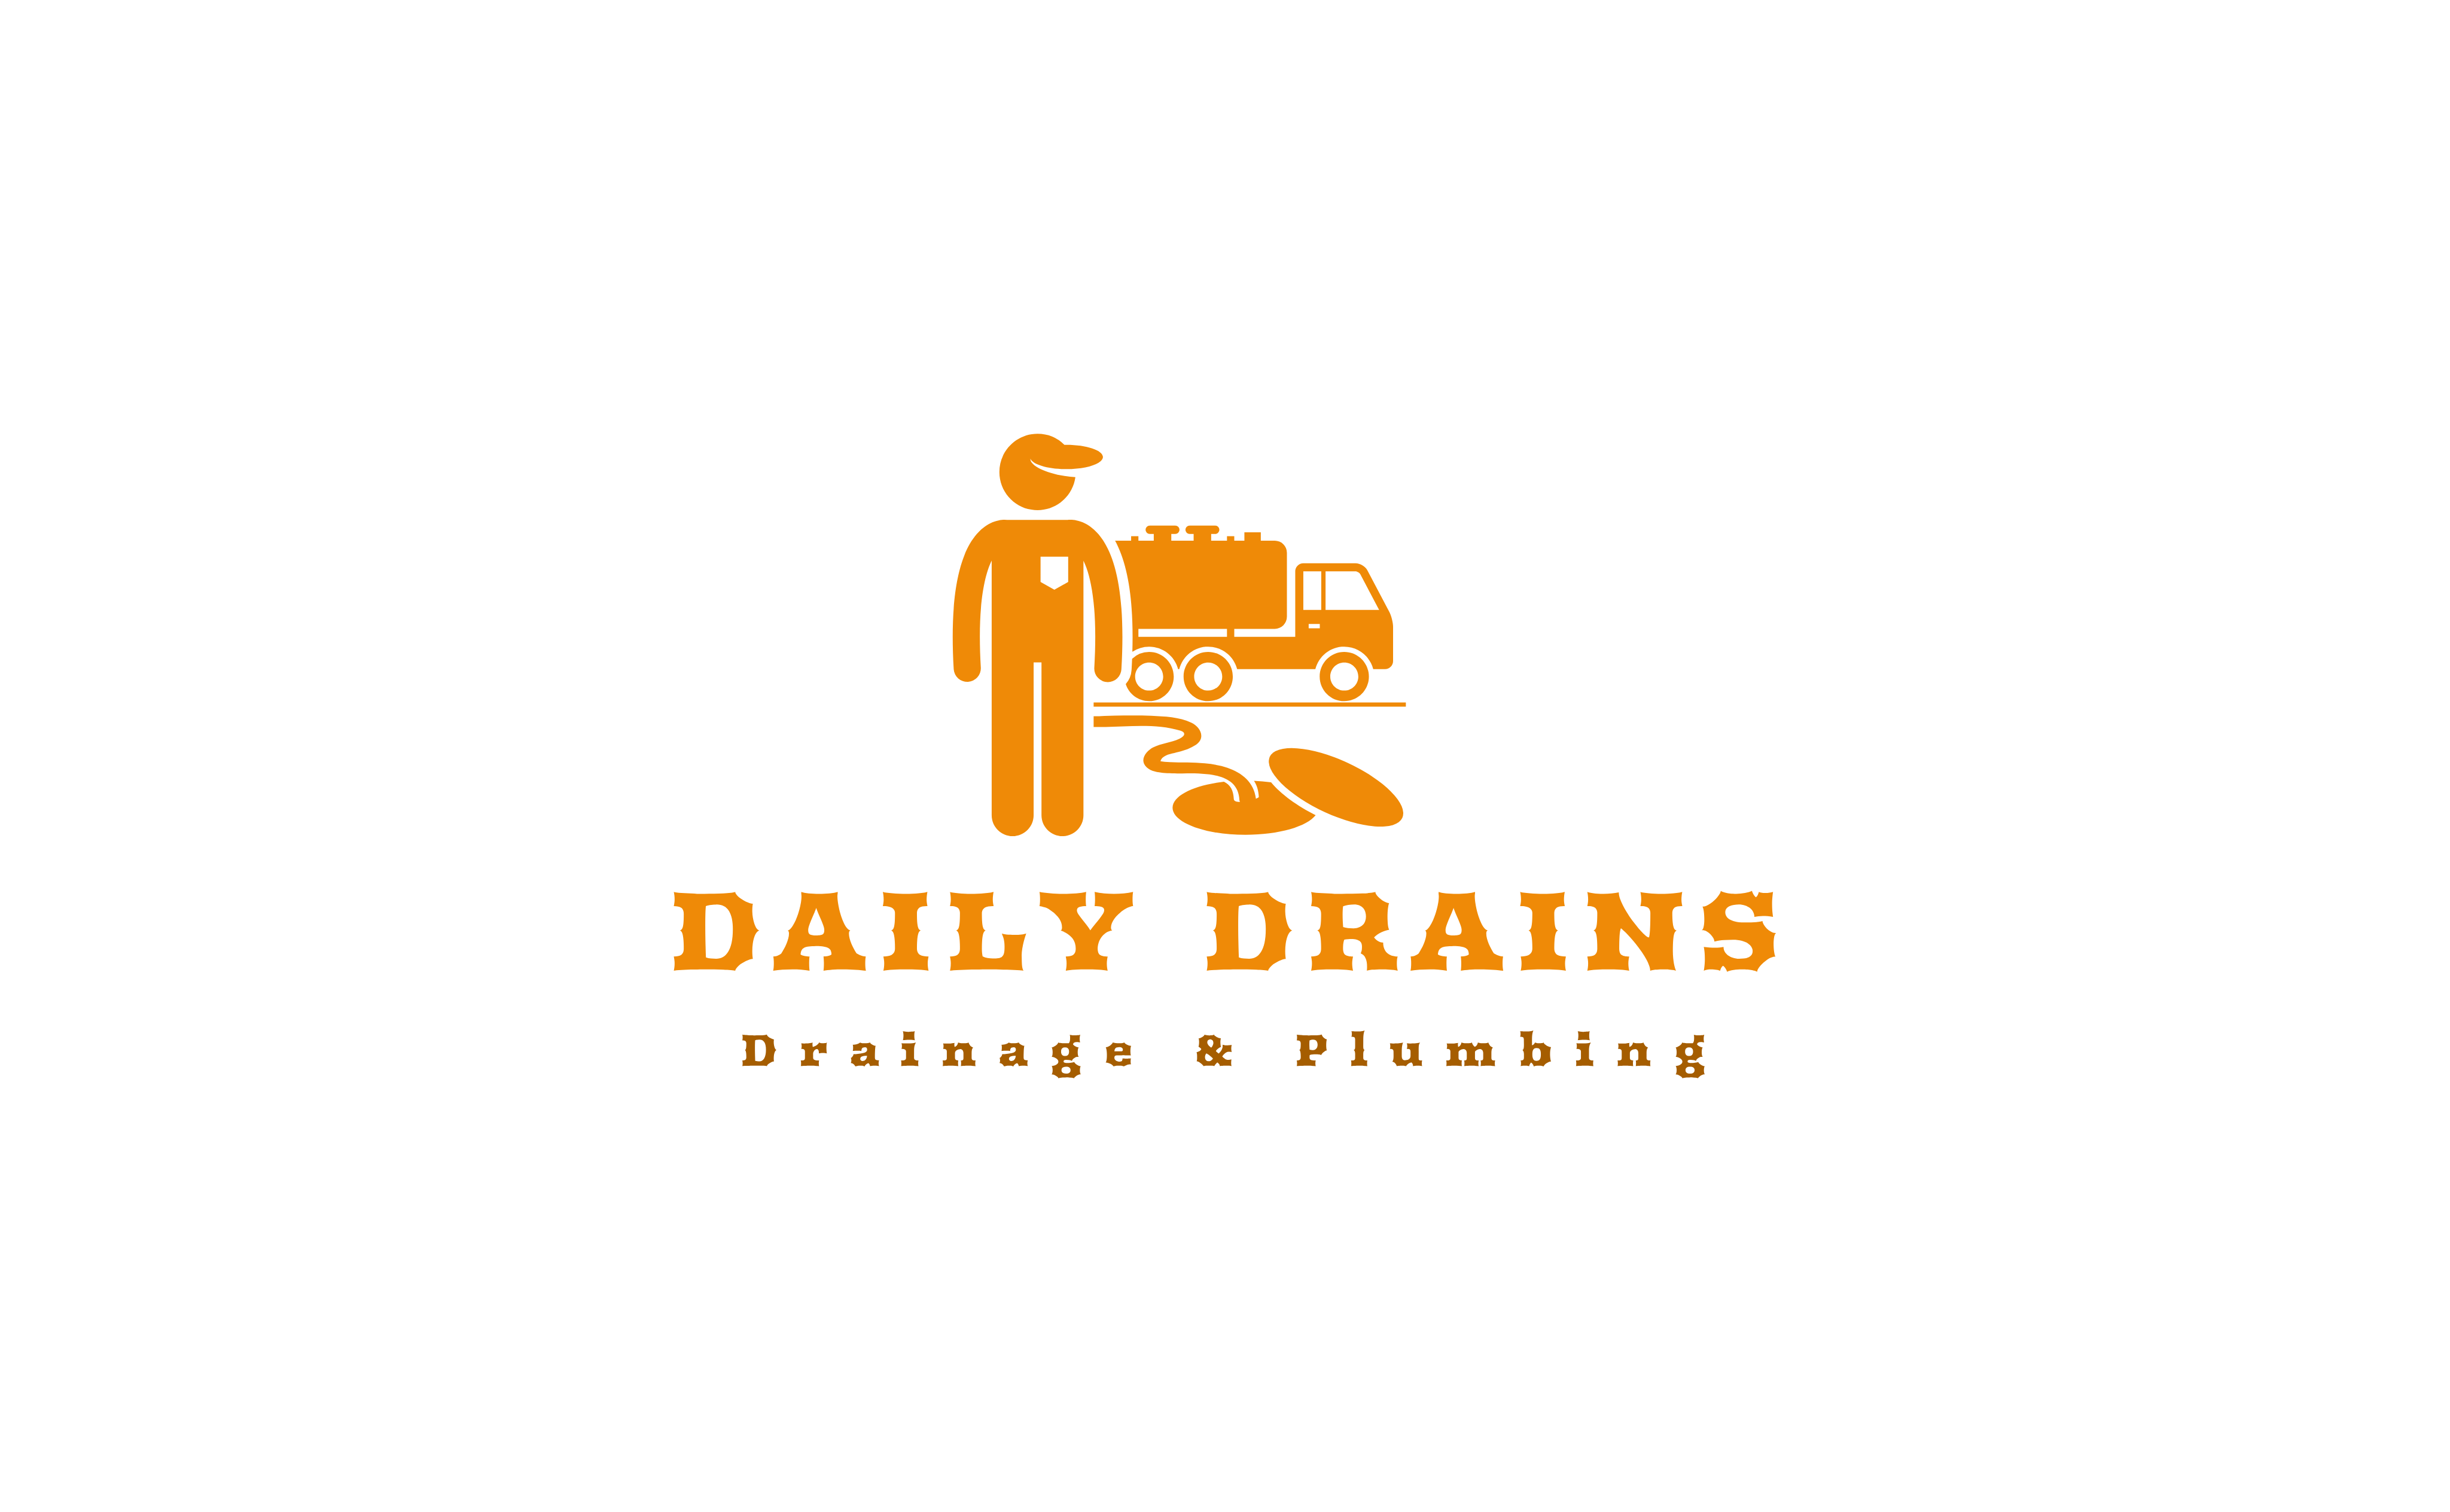 Daily Drains